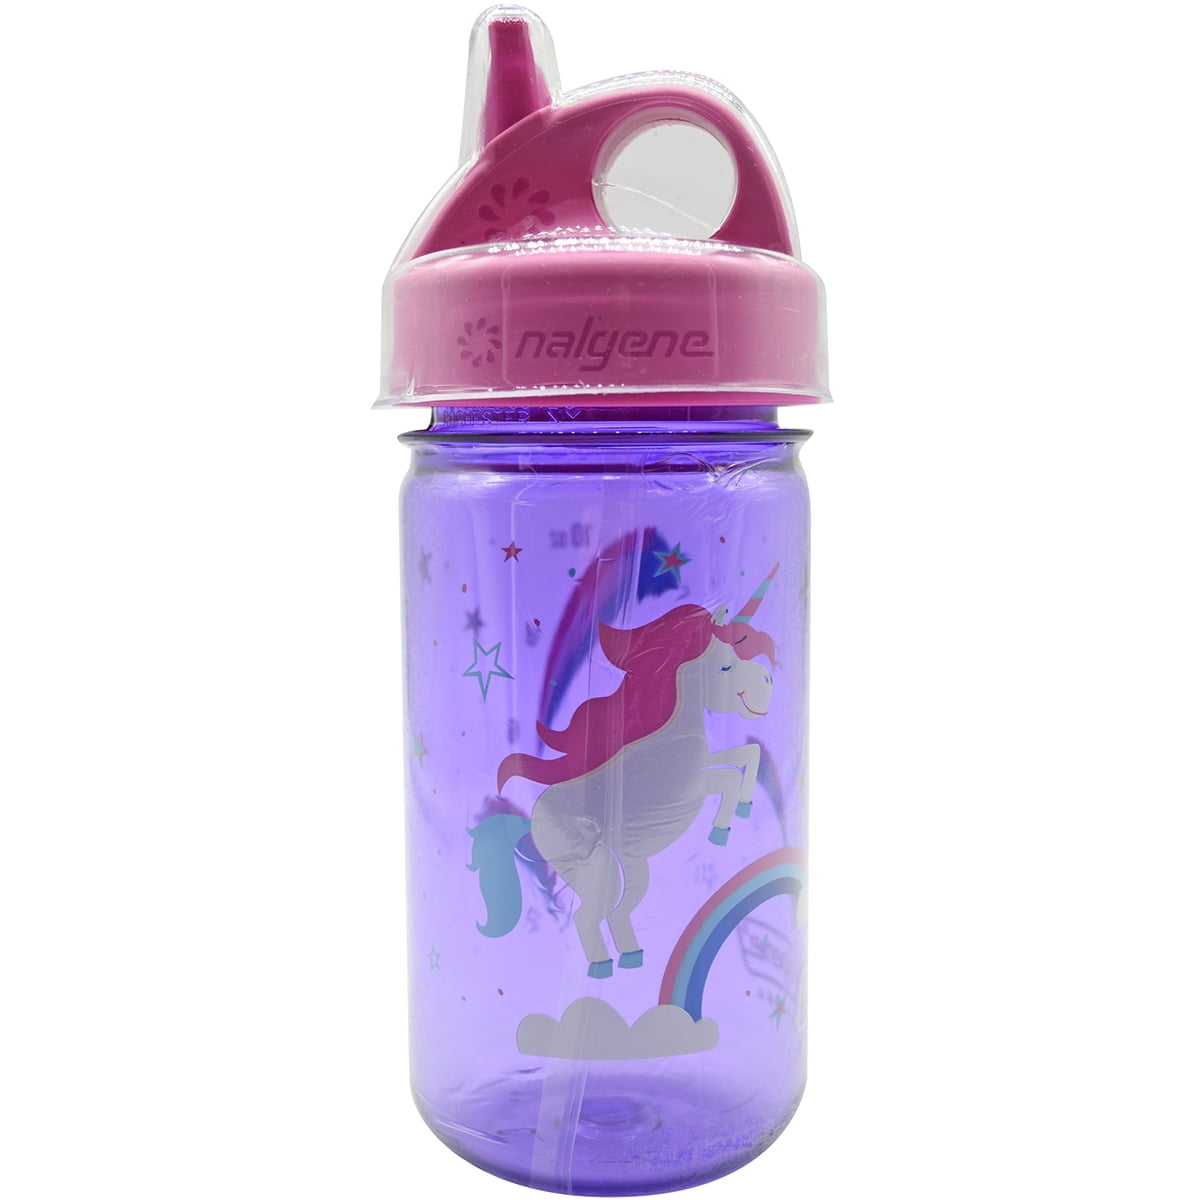 Nalgene Grip-N-Gulp 12 oz Reusable Bottle Sippy Cup Kids PURPLE with cover